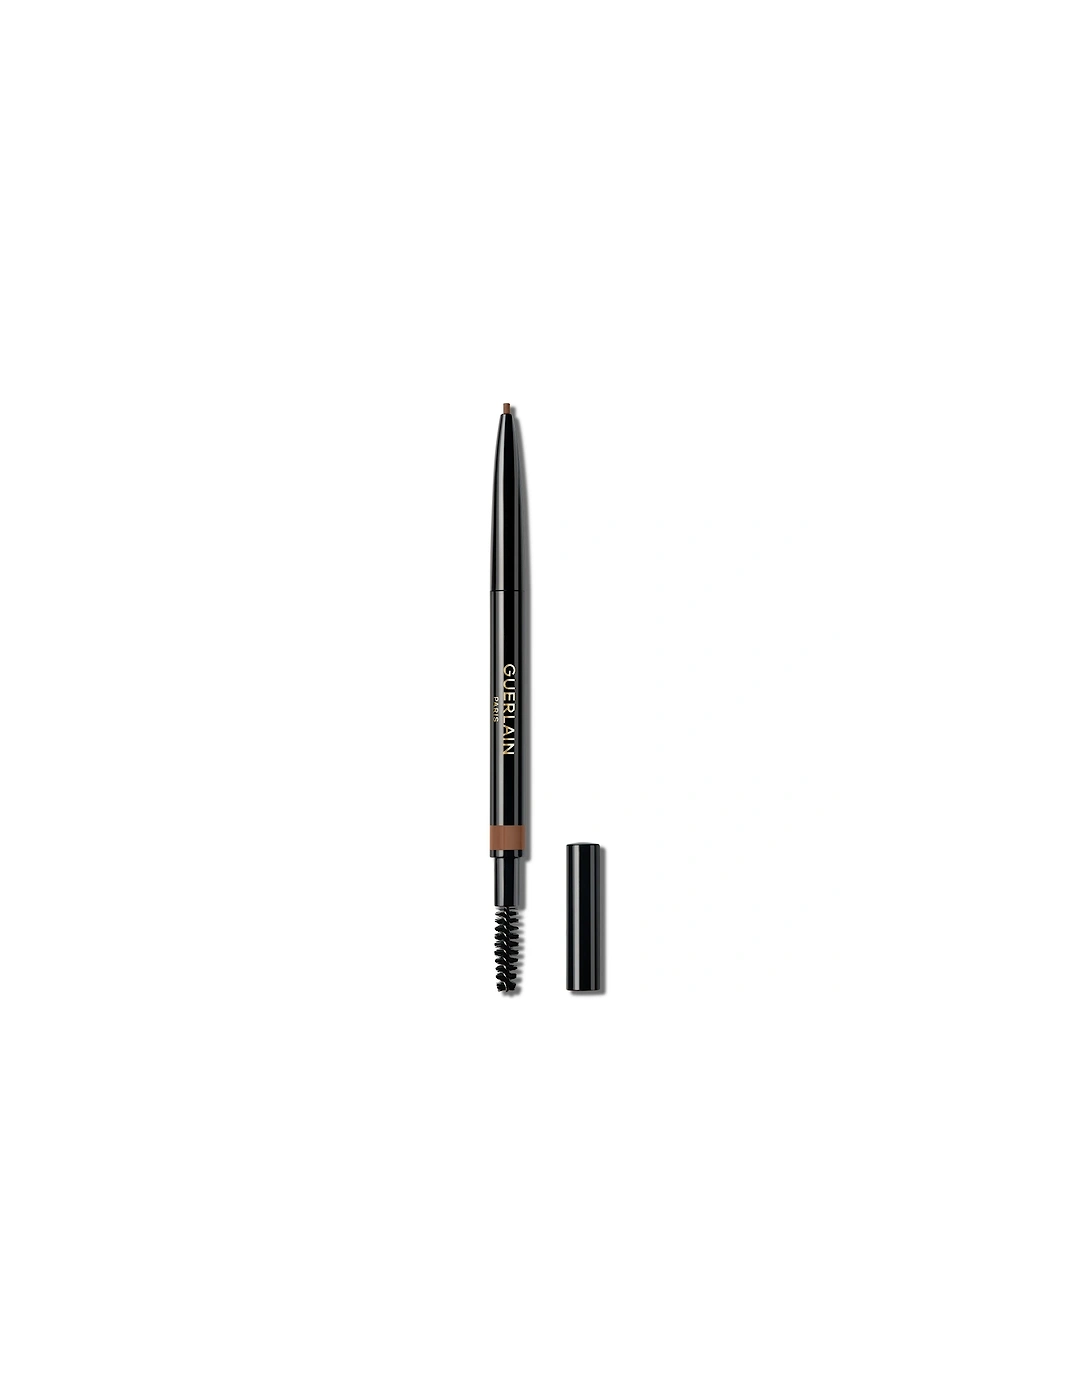 Brow G High Precision and Long Wear Brow Pencil - 02 Auburn, 2 of 1